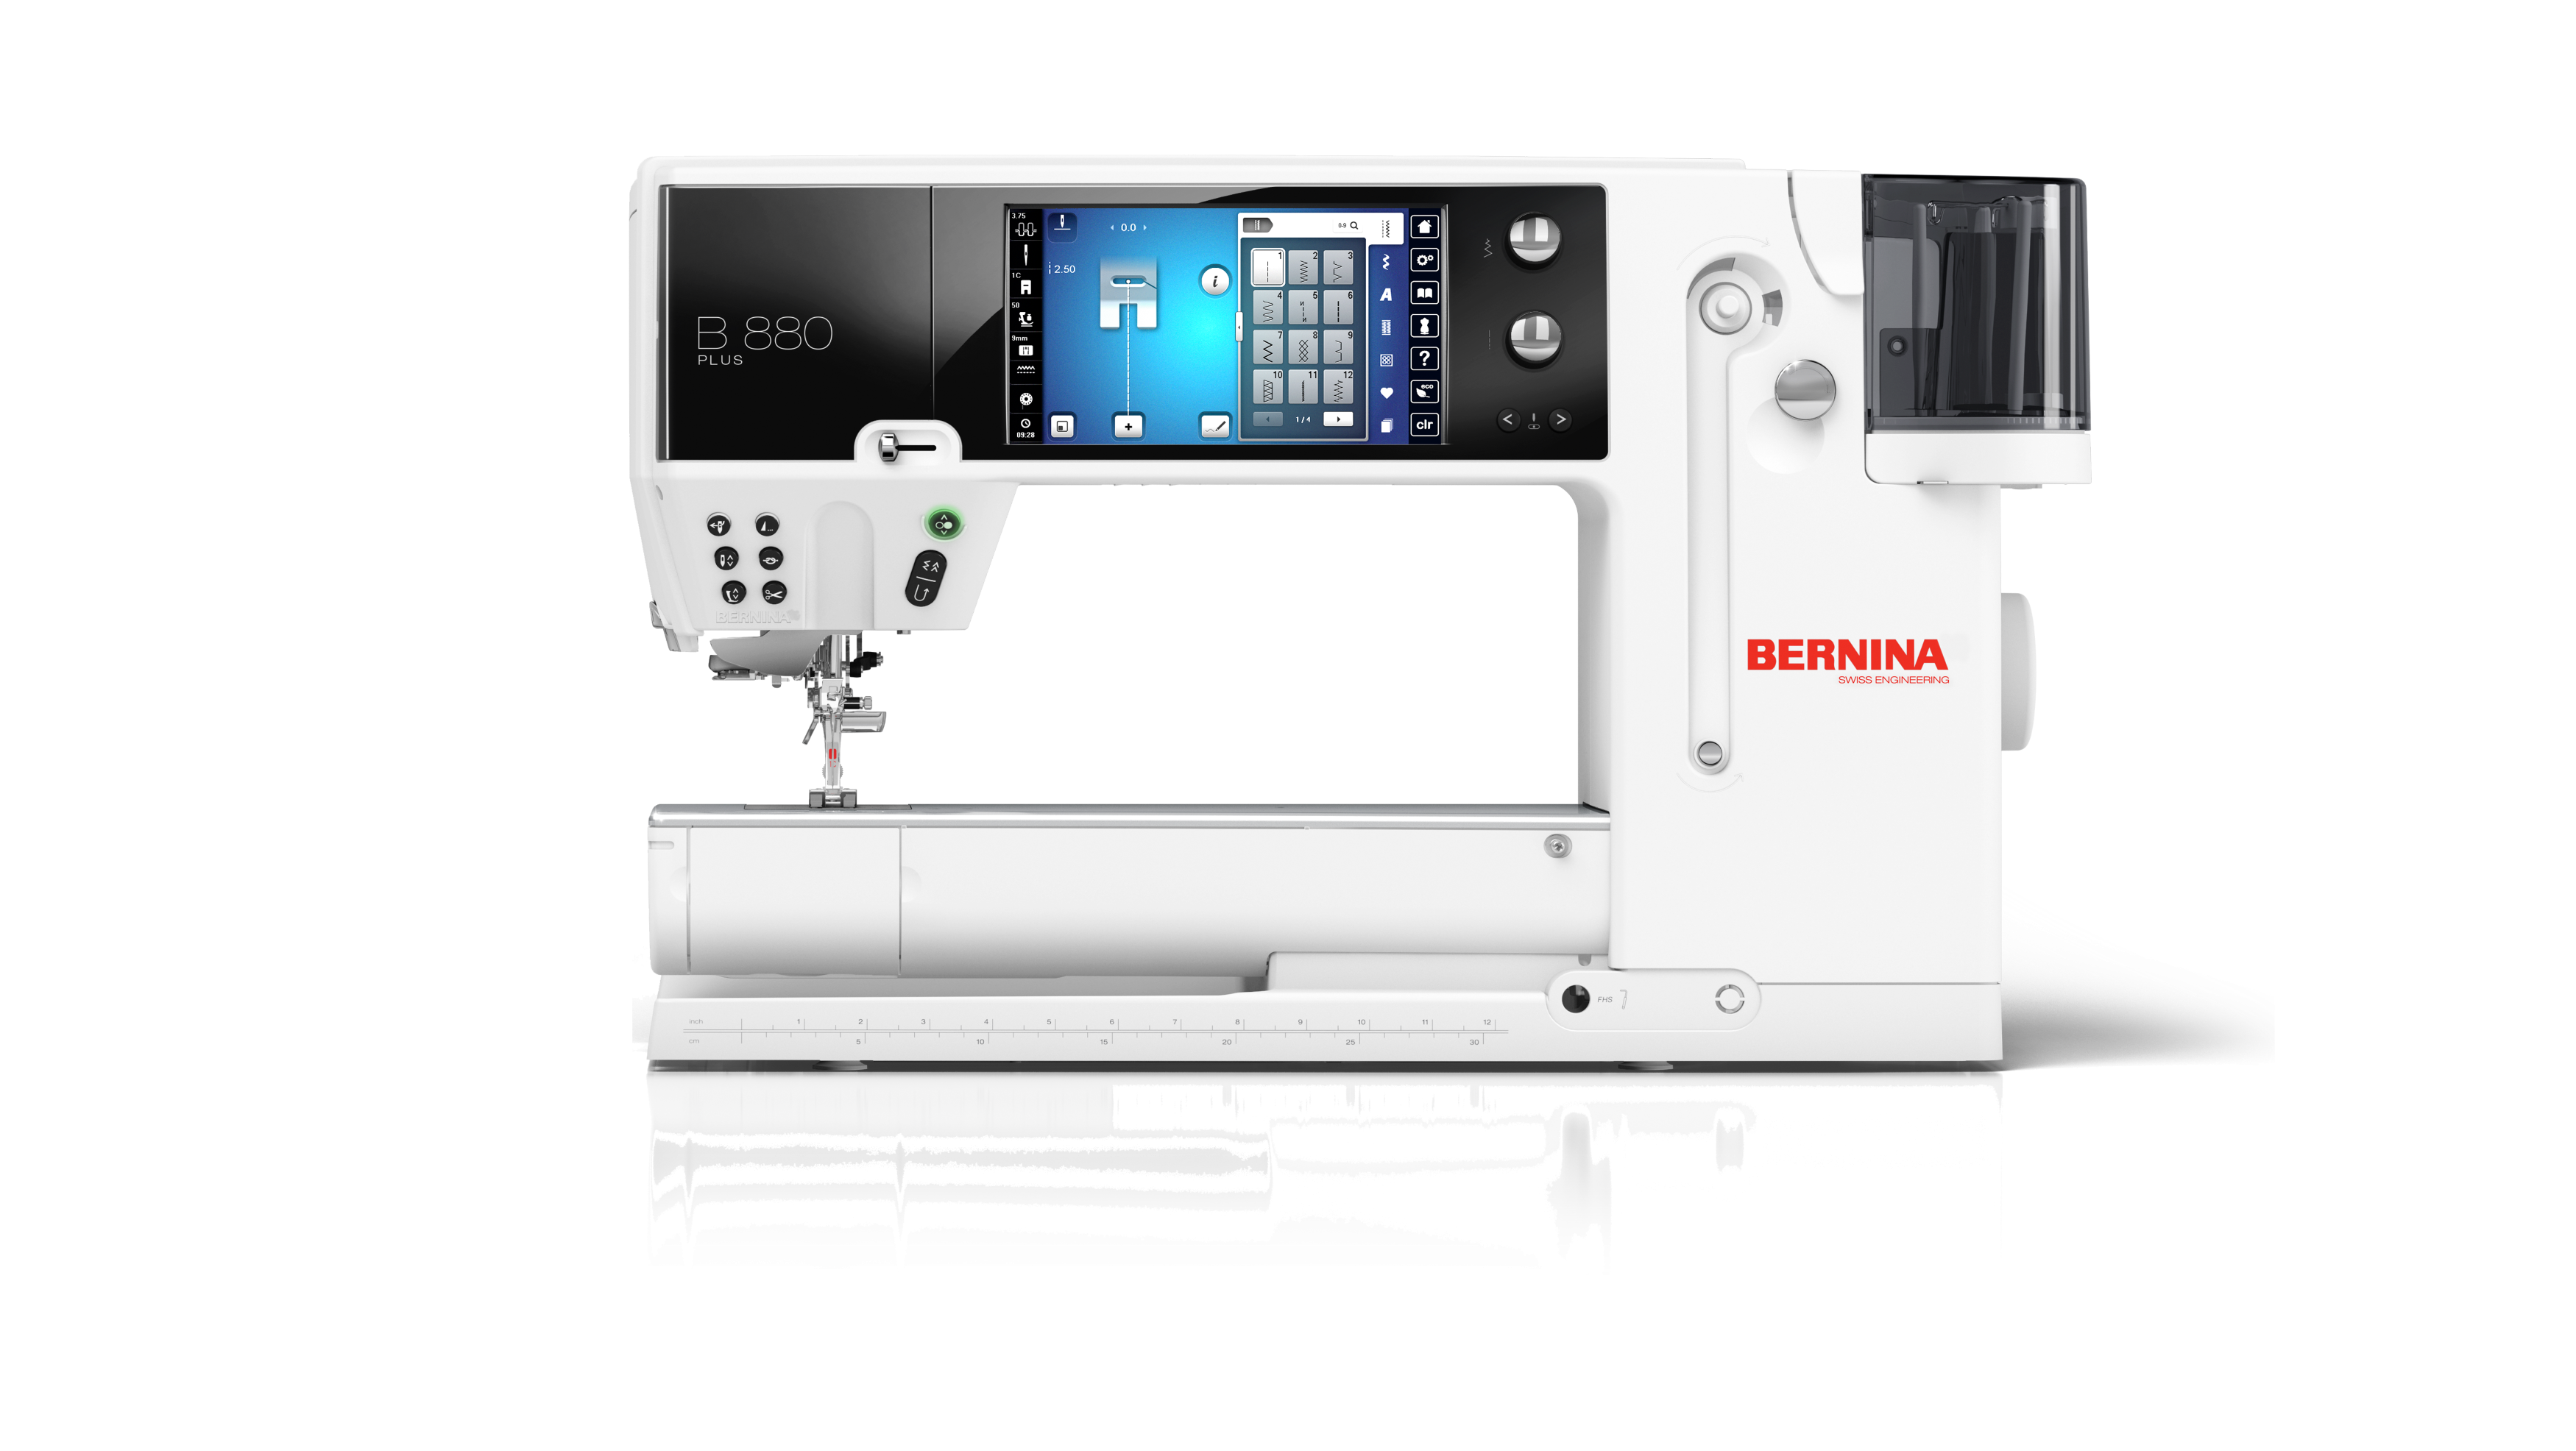 front facing image of the BERNINA 880 PLUS Sewing and Embroidery Machine